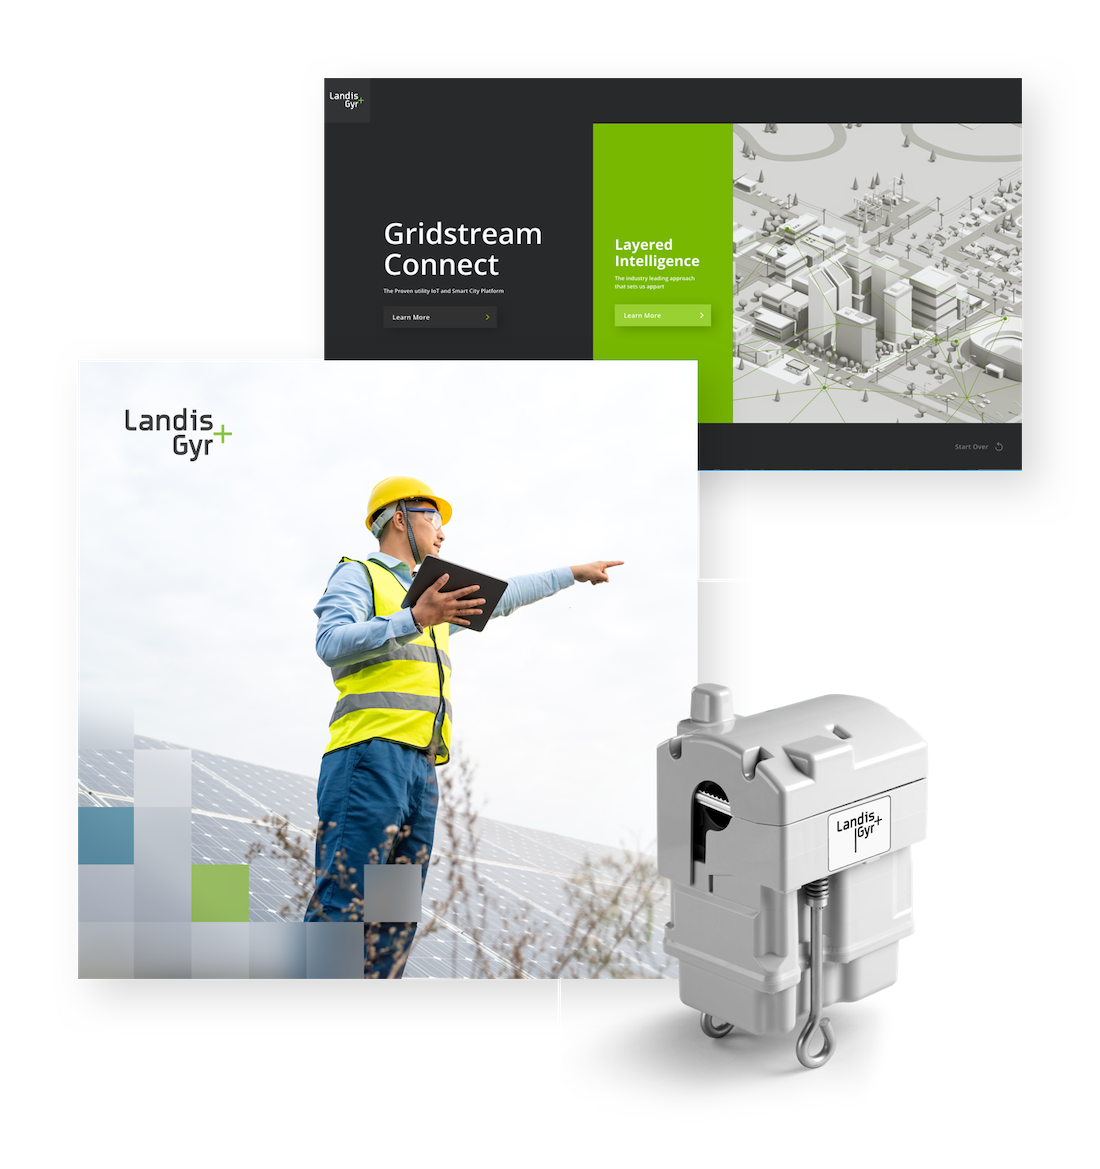 an image of the landis+gyr homepage, a landis+gyr worker, and a piece of landis+gyr equipment